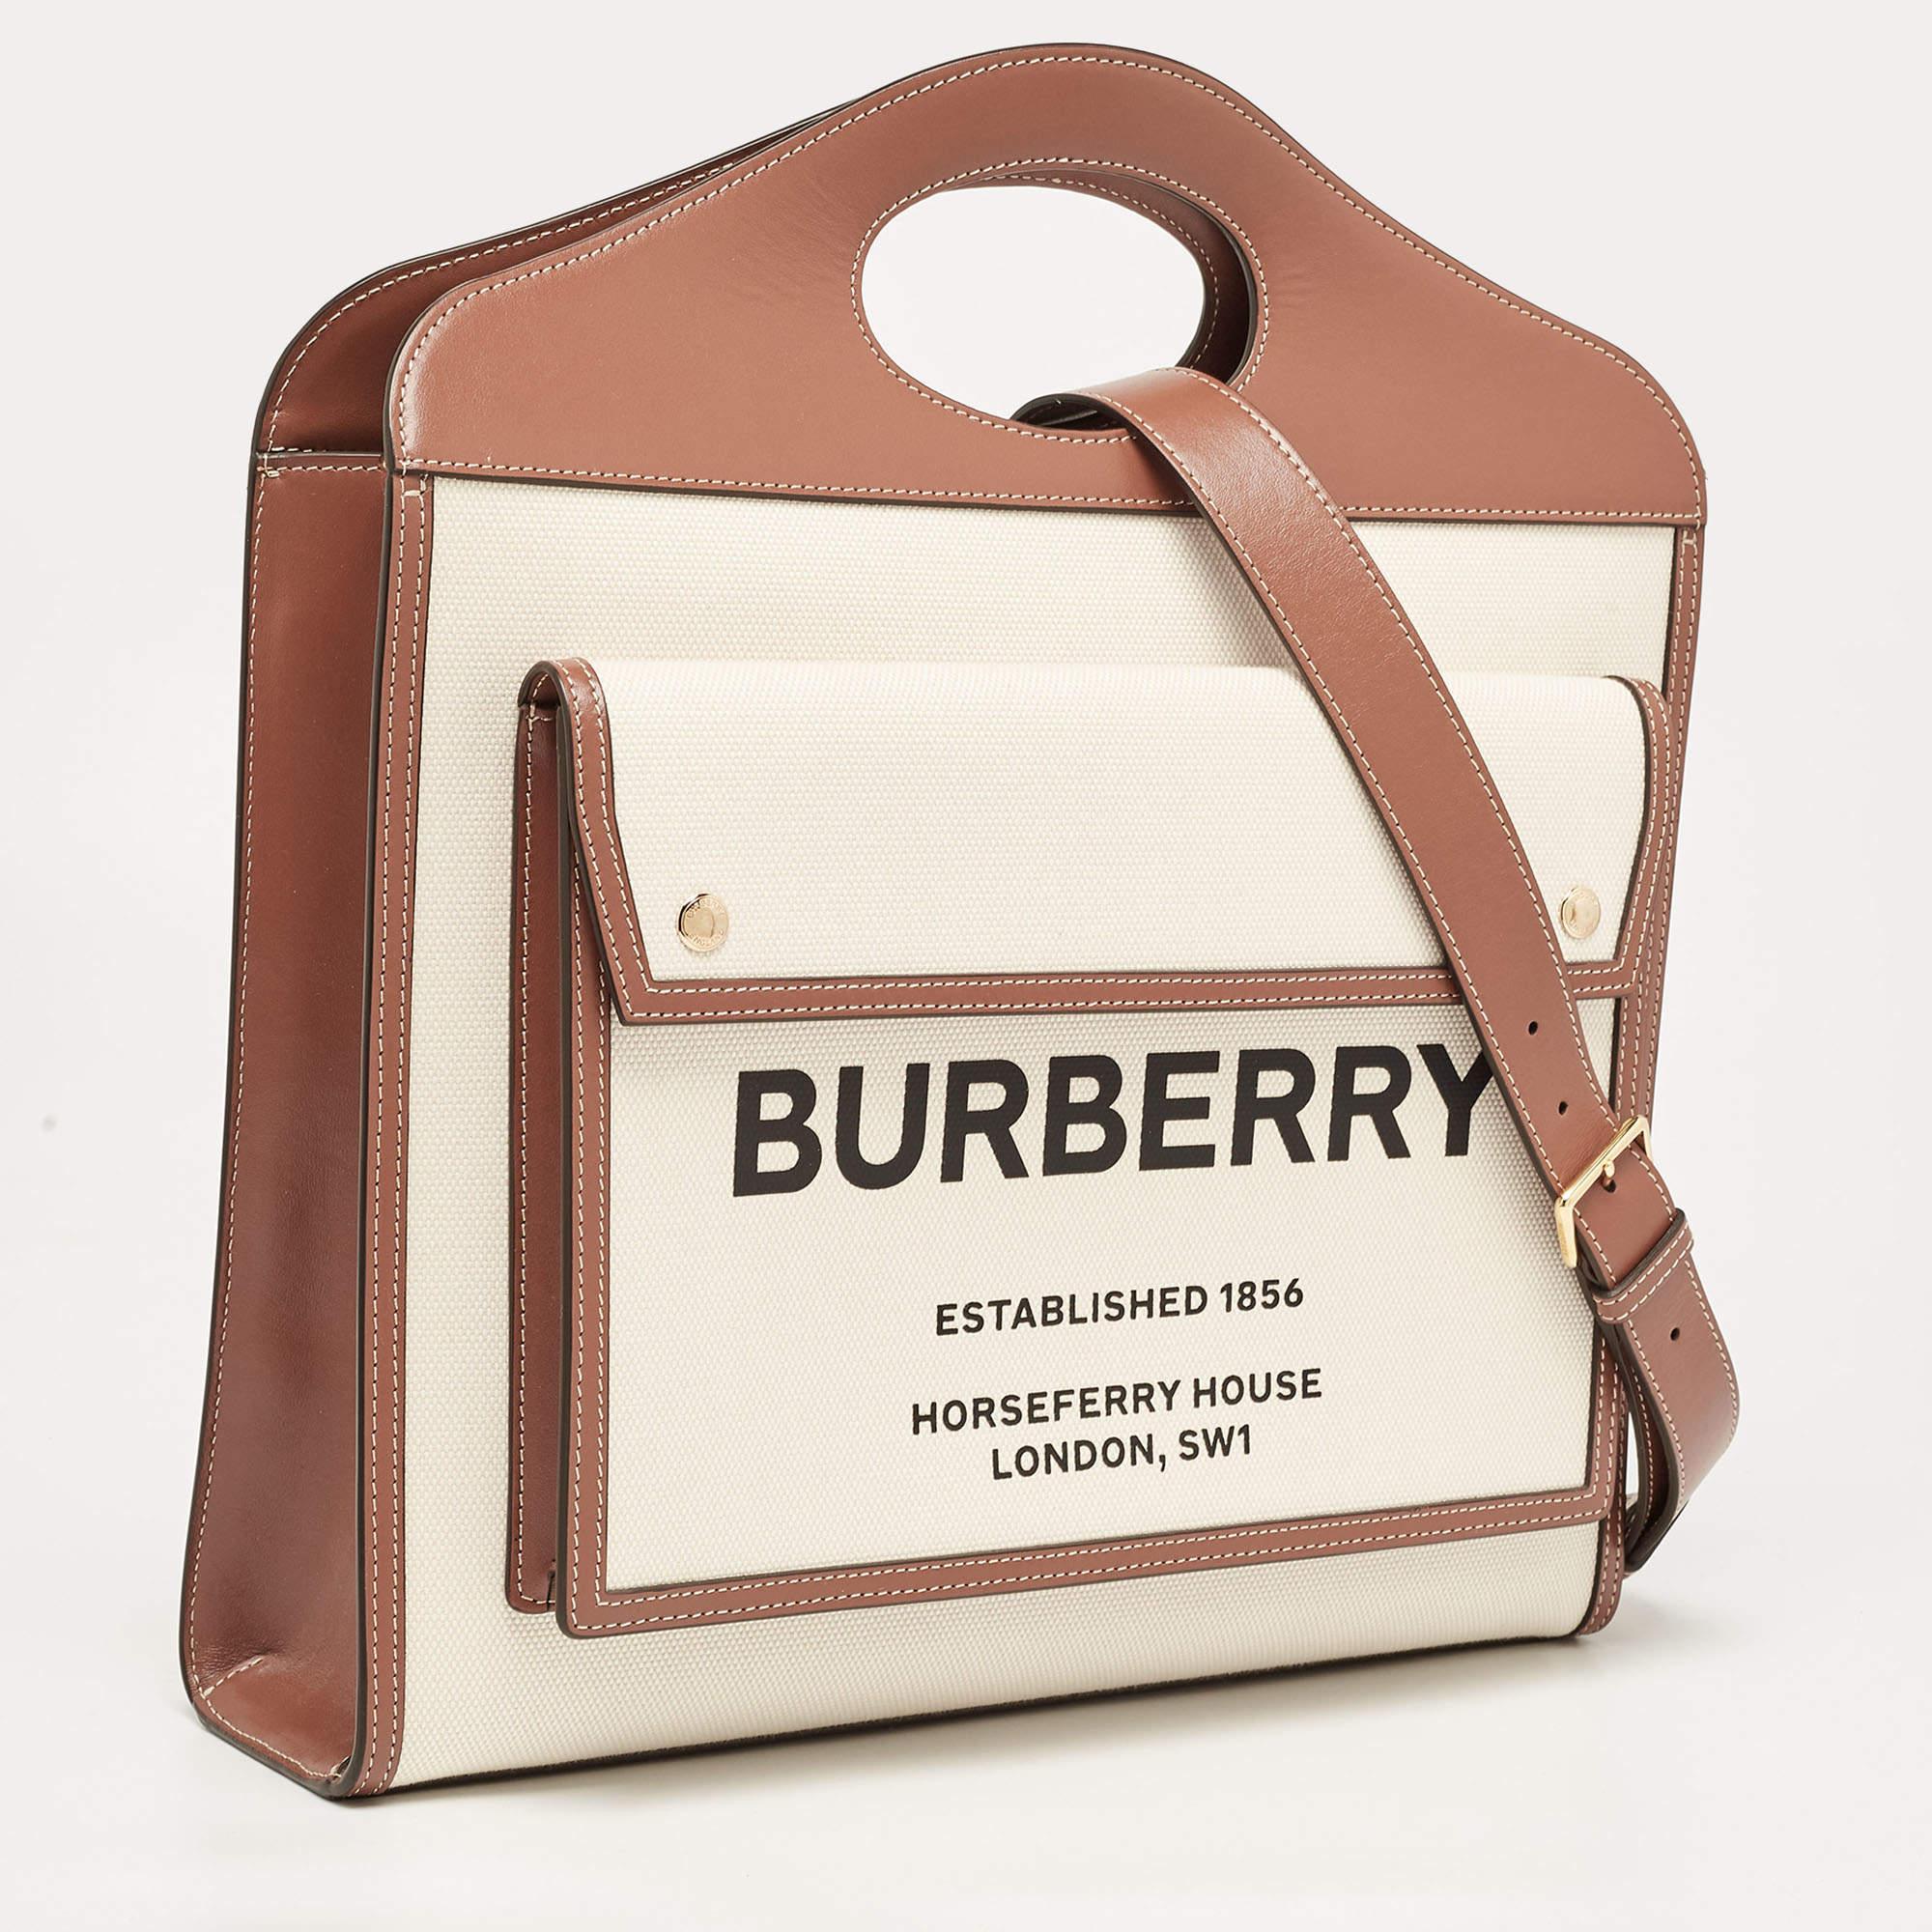 Burberry Brown/Beige Leather and Canvas Medium Pocket Bag 8